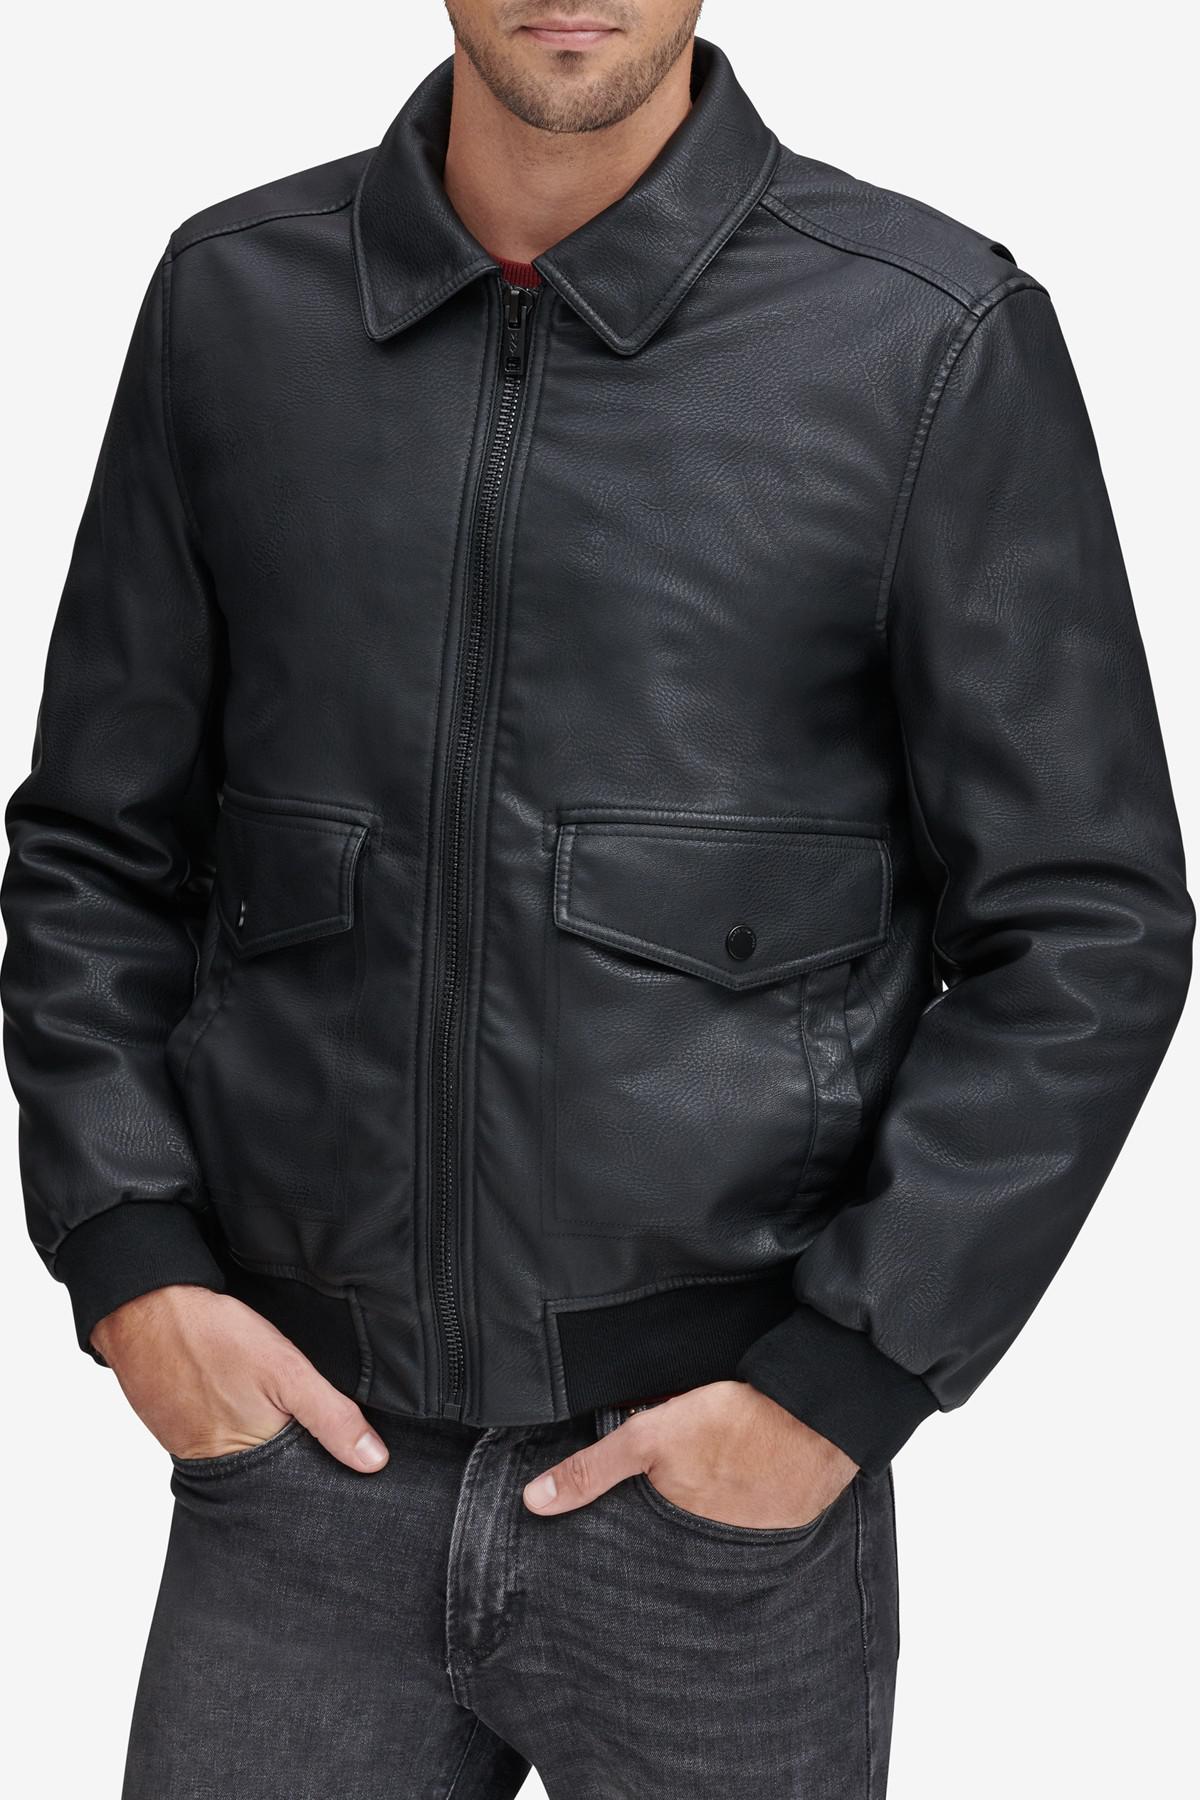 Andrew Marc Westerly Faux Leather Bomber Jacket in Black for Men - Lyst